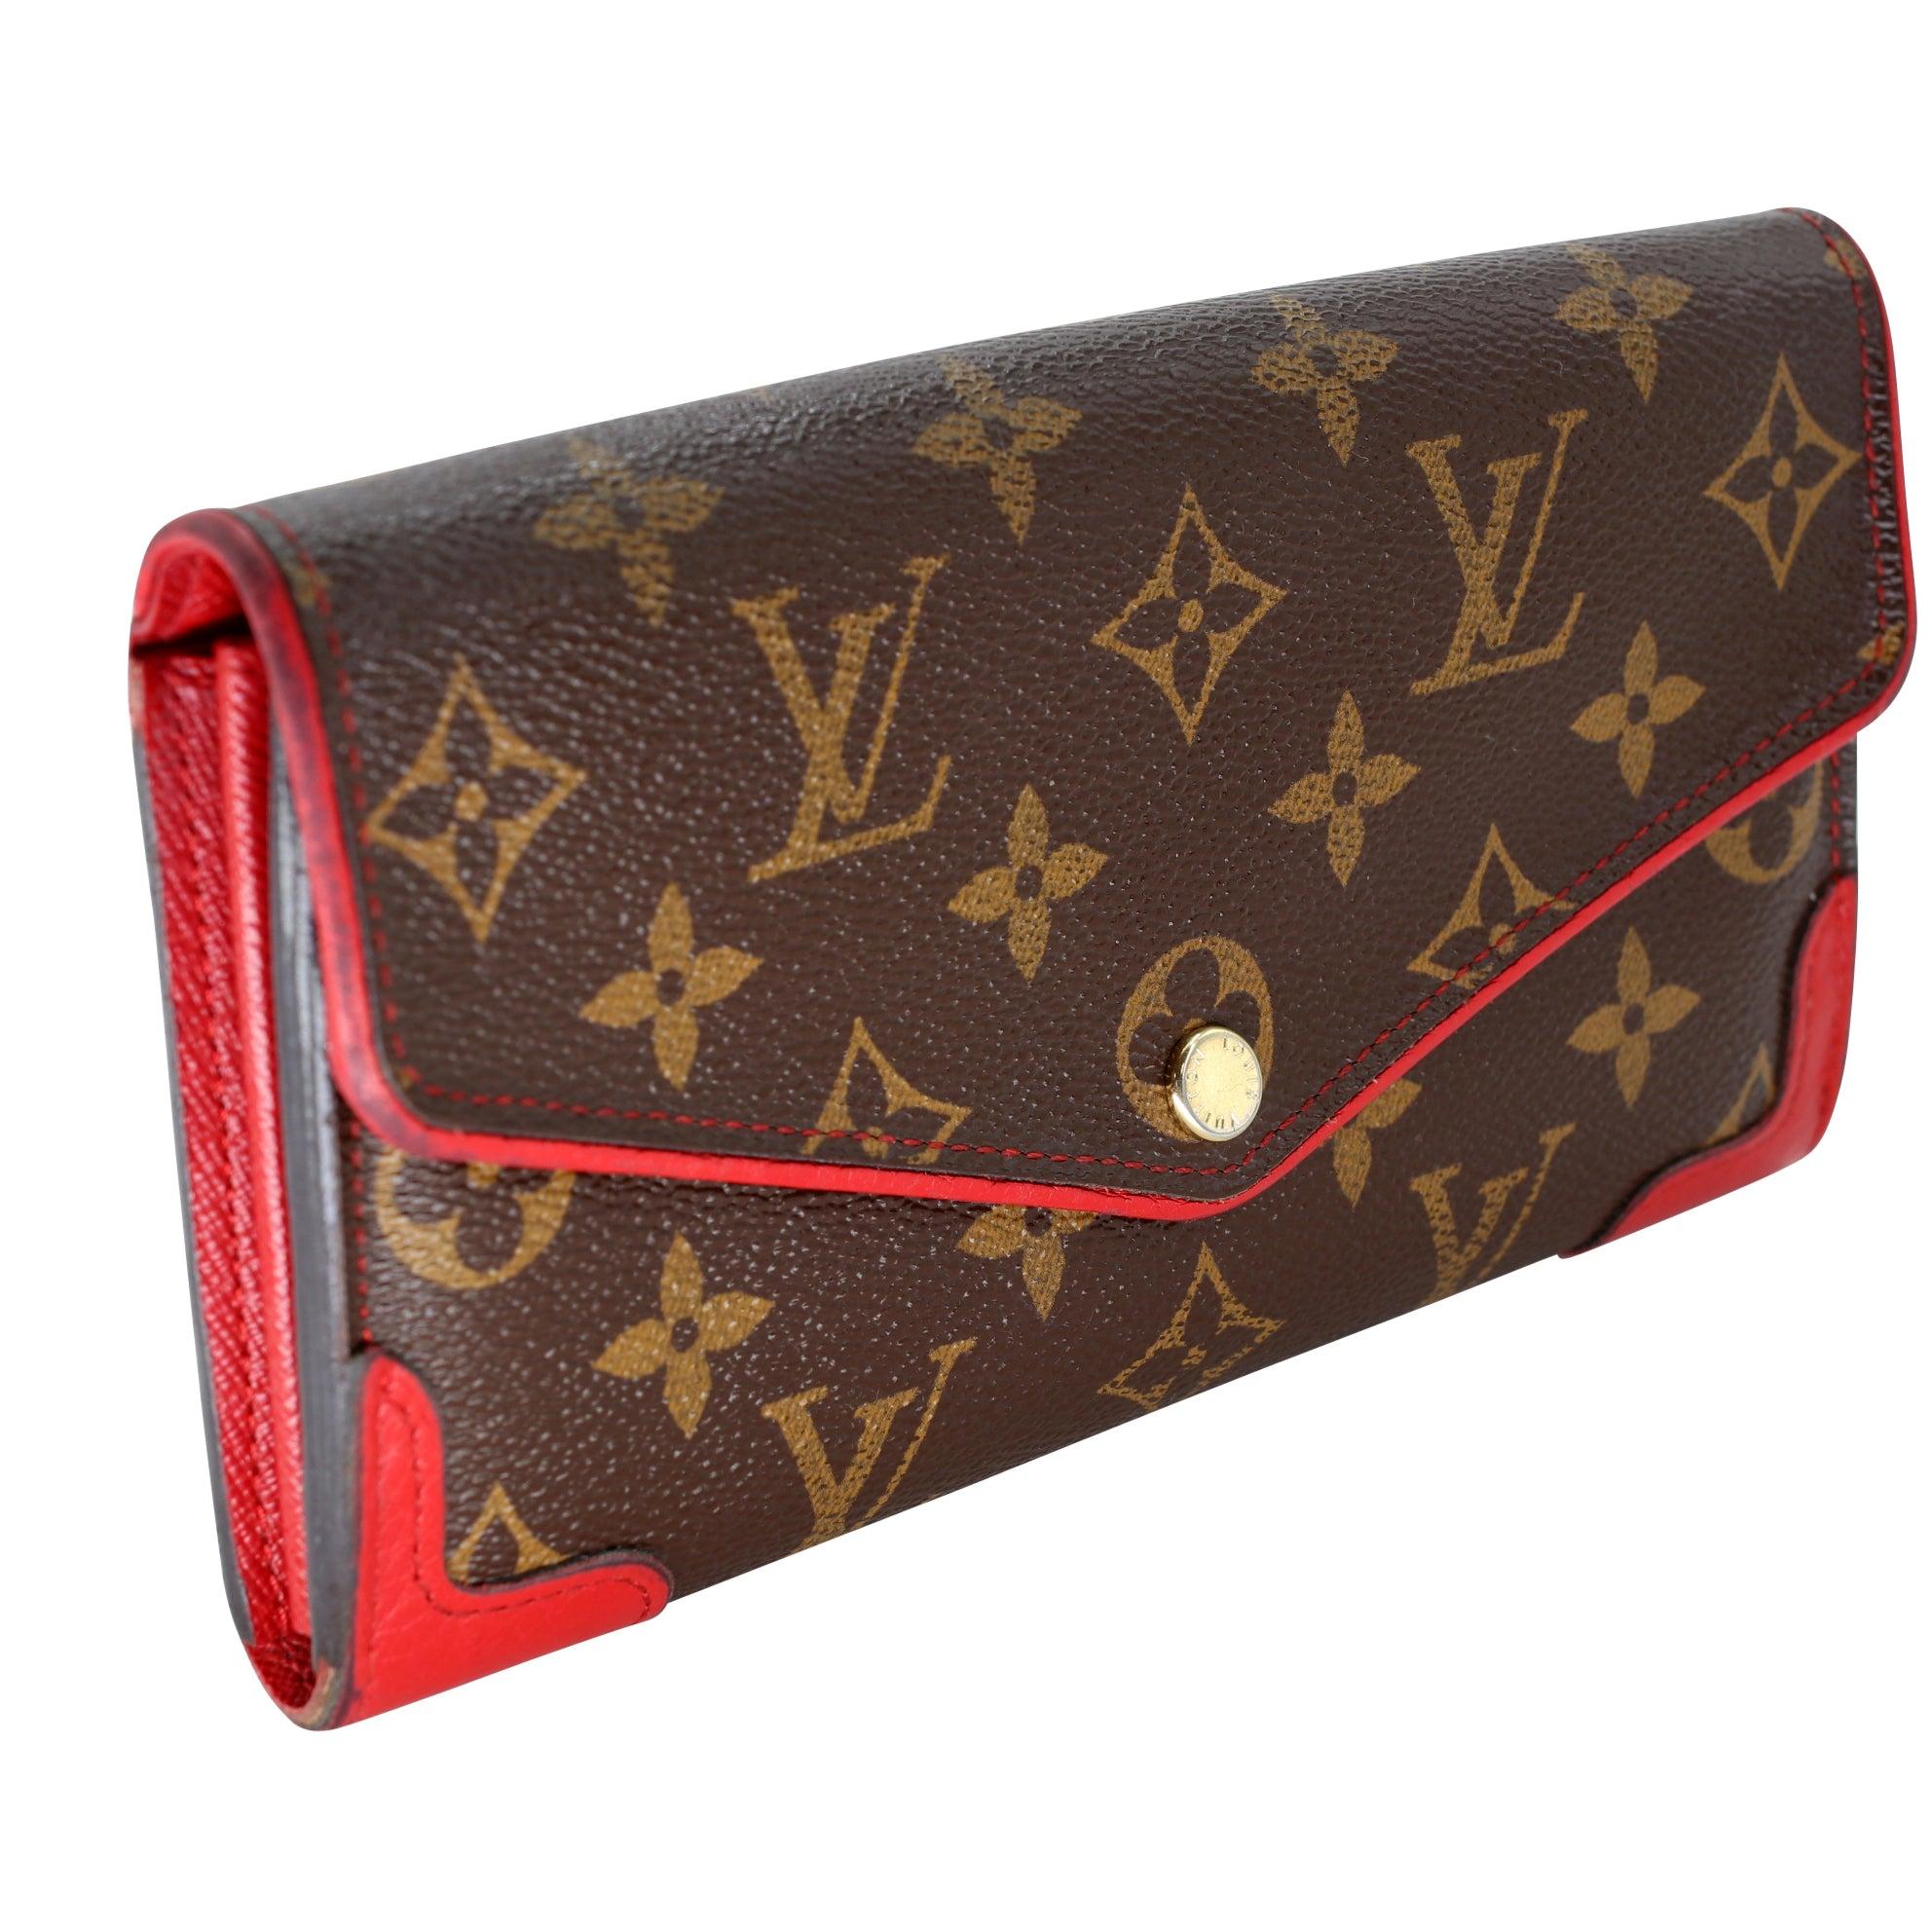 The Louis Vuitton Portefeiulle wallet is perfect if you're seeking something sleek and compact. With many credit card slots for all your needs, includes bill compartment, it will be the only wallet you will want to take with you everywhere. The